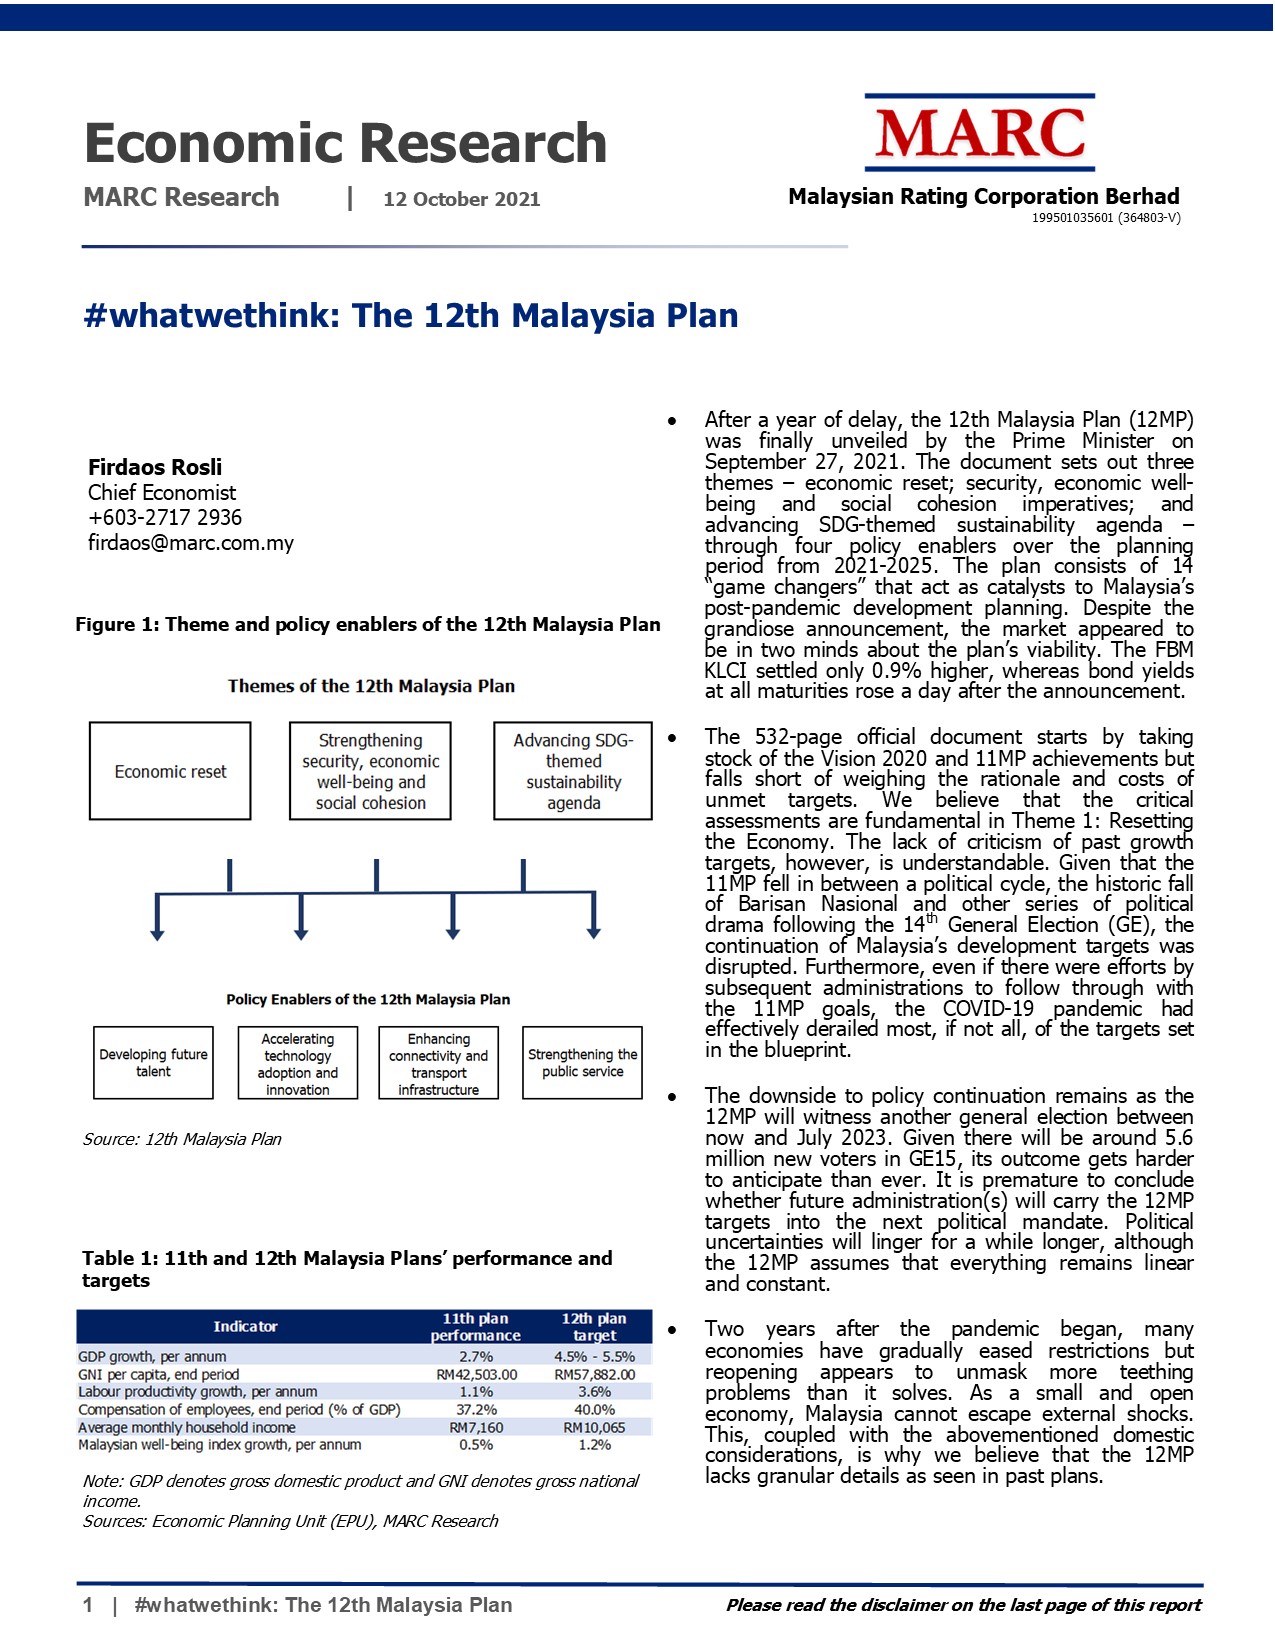 20211011 - The 12th Malaysia Plan Page 1